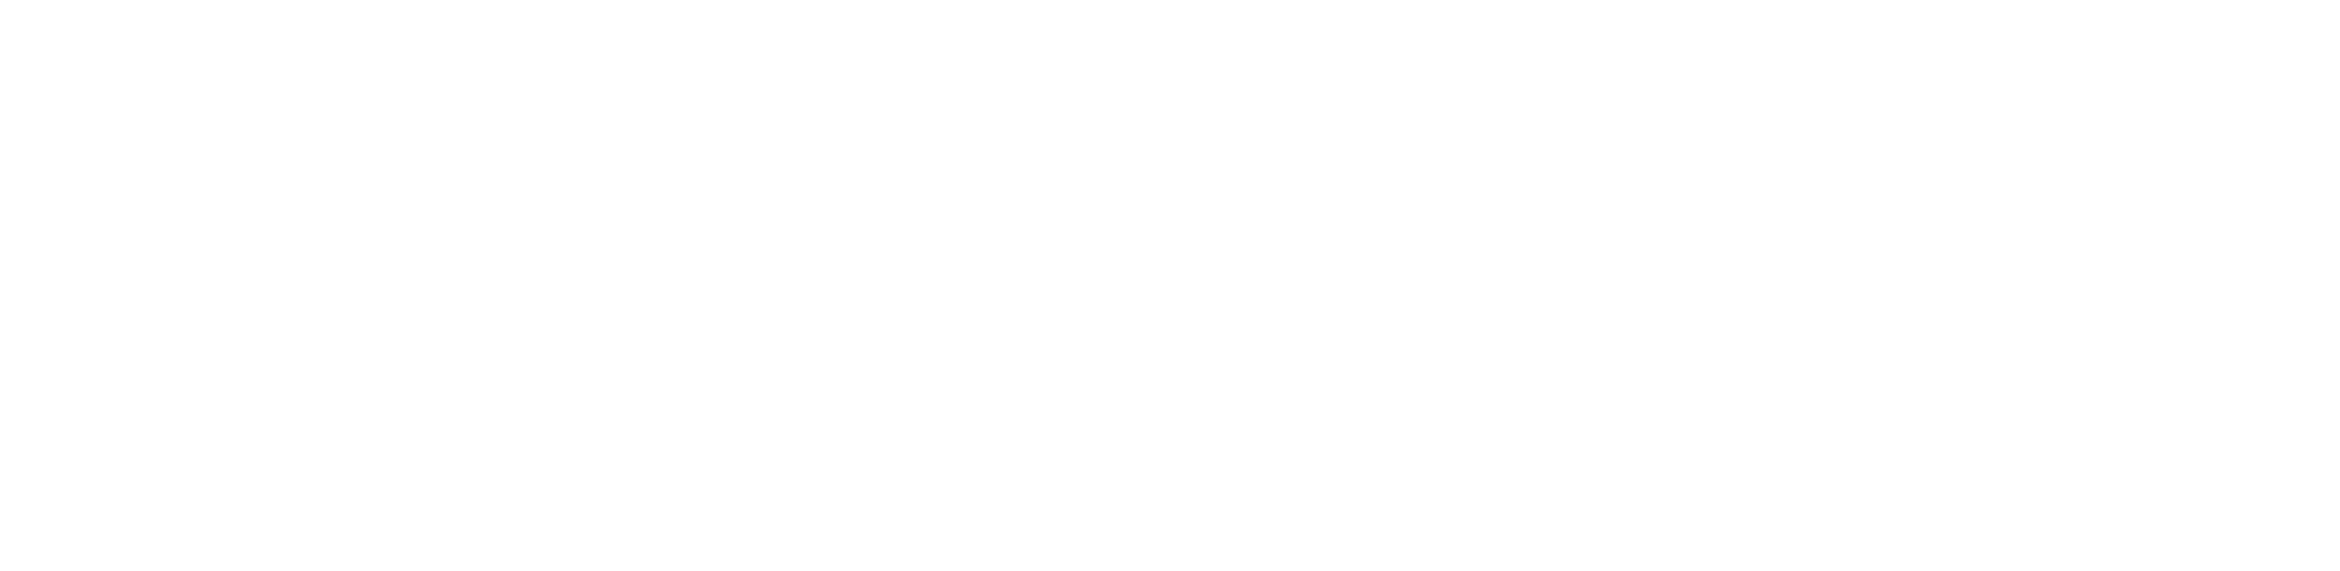 Goebel Funeral Home & Cremation Services Logo